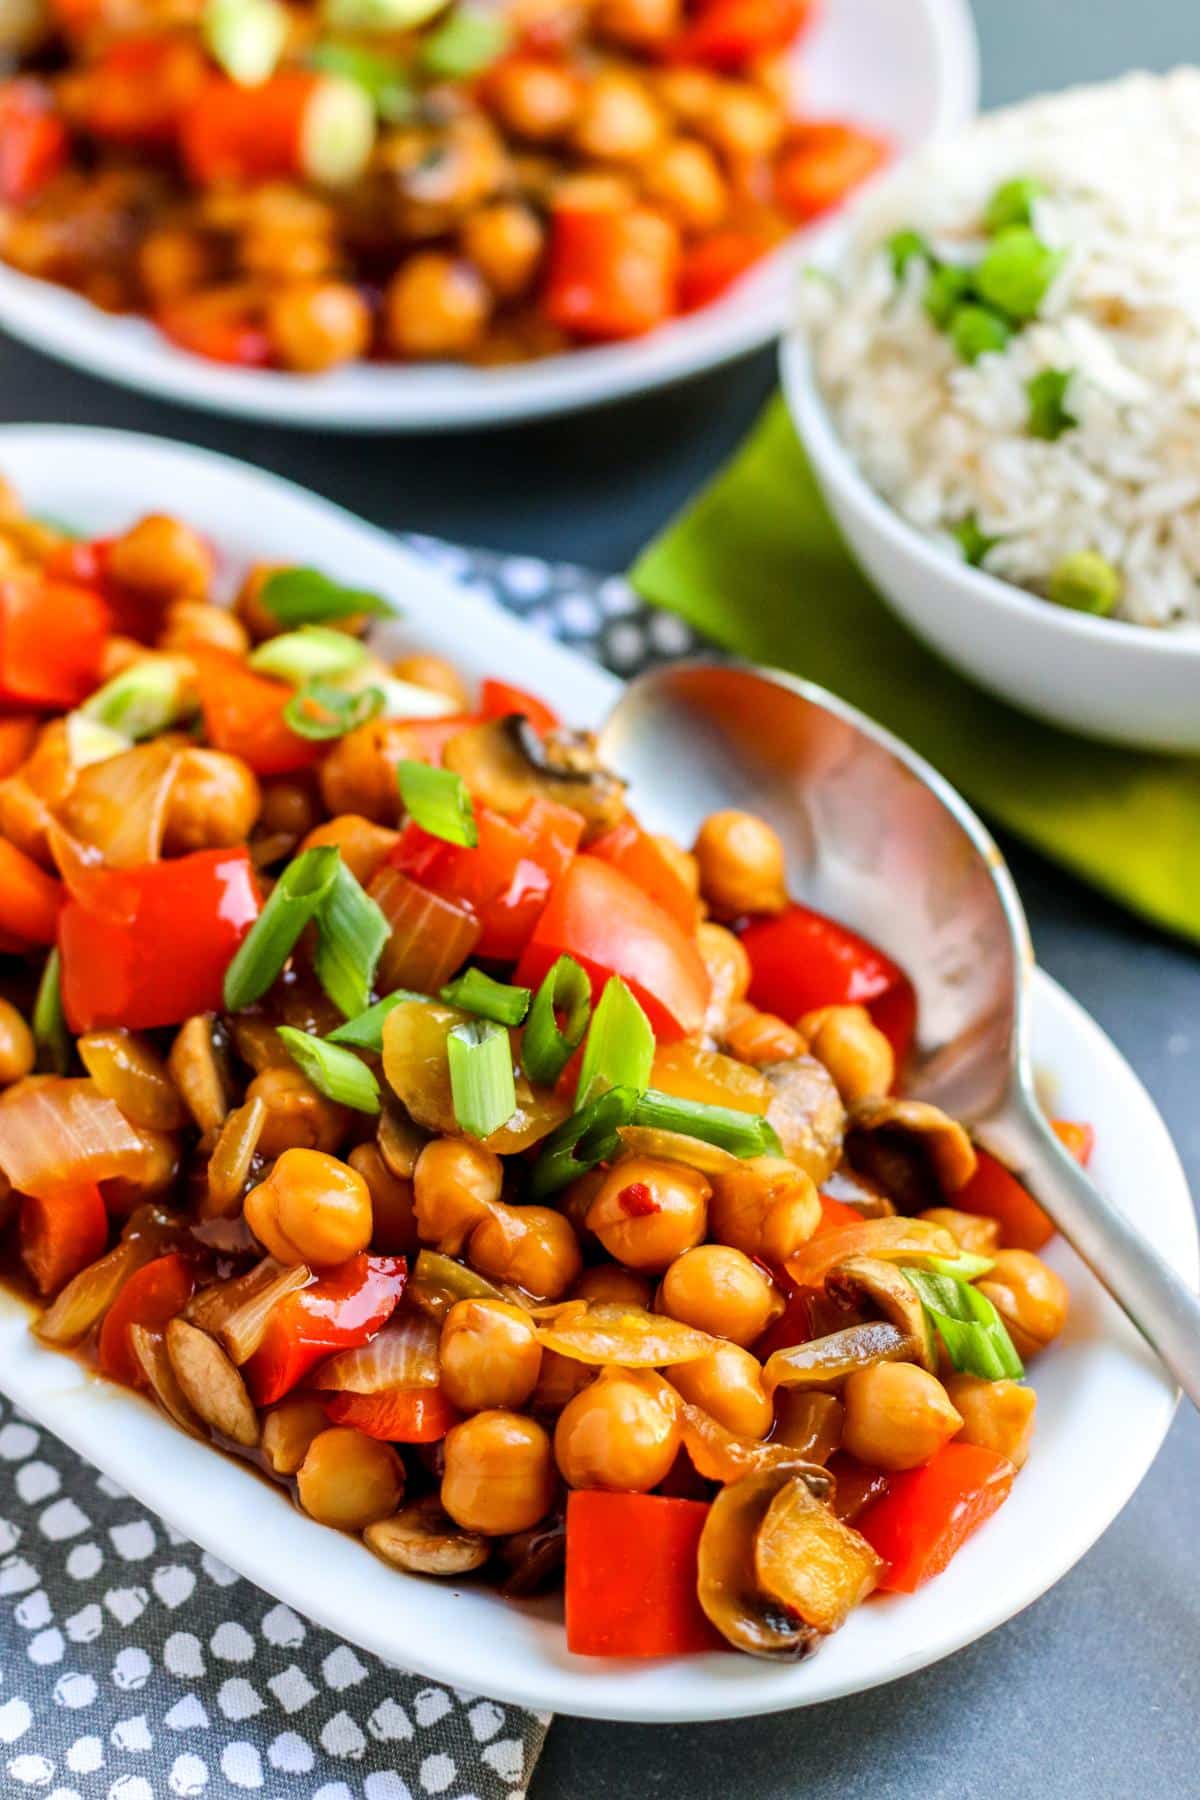 Platter of chickpea stir fry with a serving spoon in it.